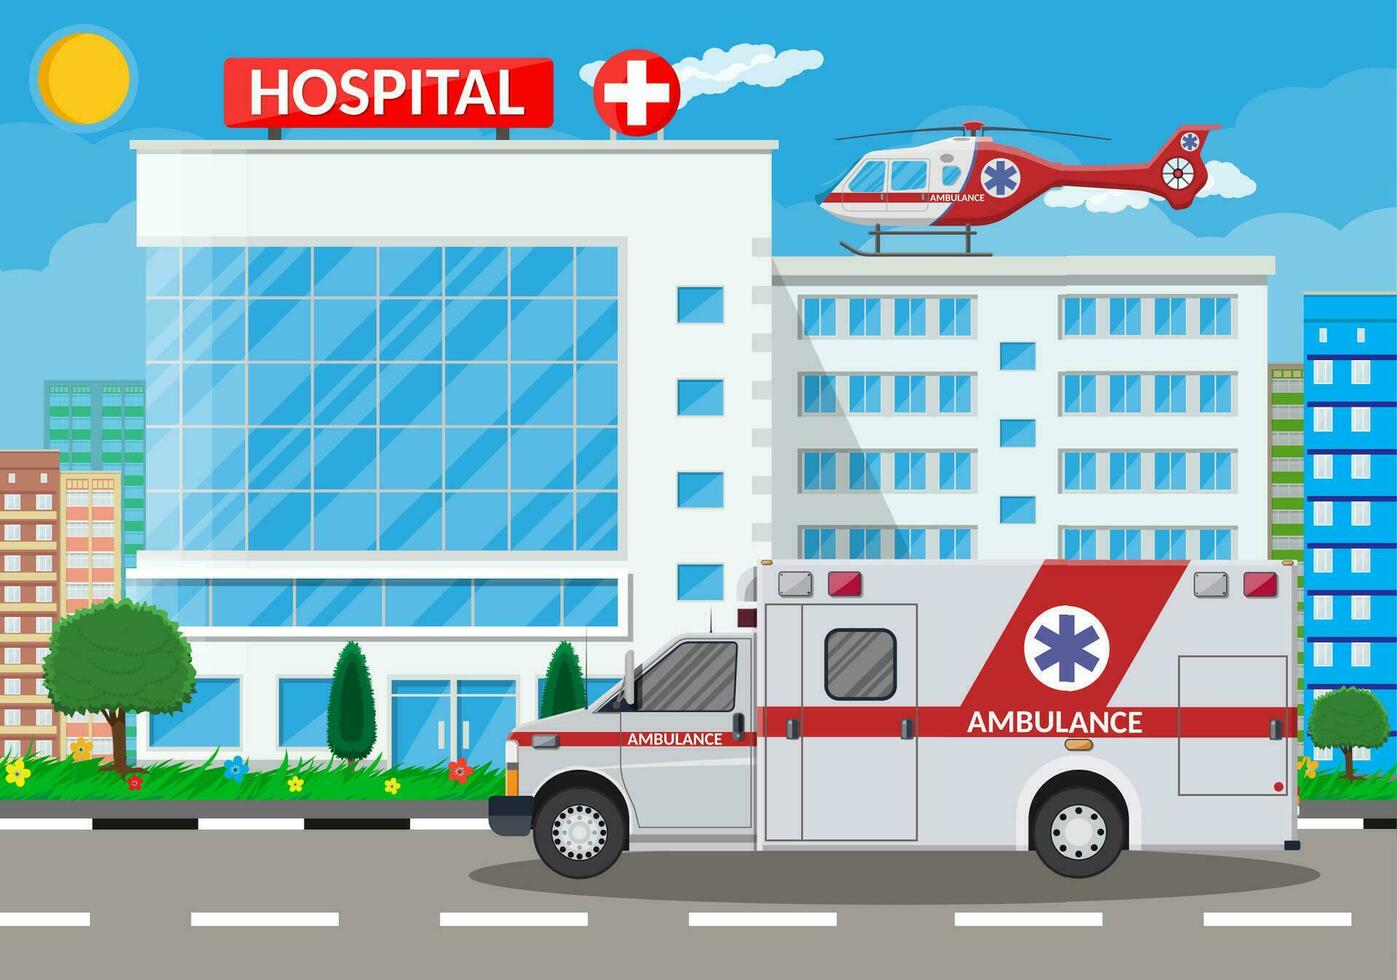 Hospital building, medical icon. Healthcare, hospital and medical diagnostics. Urgency and emergency services. Road, sky, sun, tree. Car and helicopter. Vector illustration in flat style